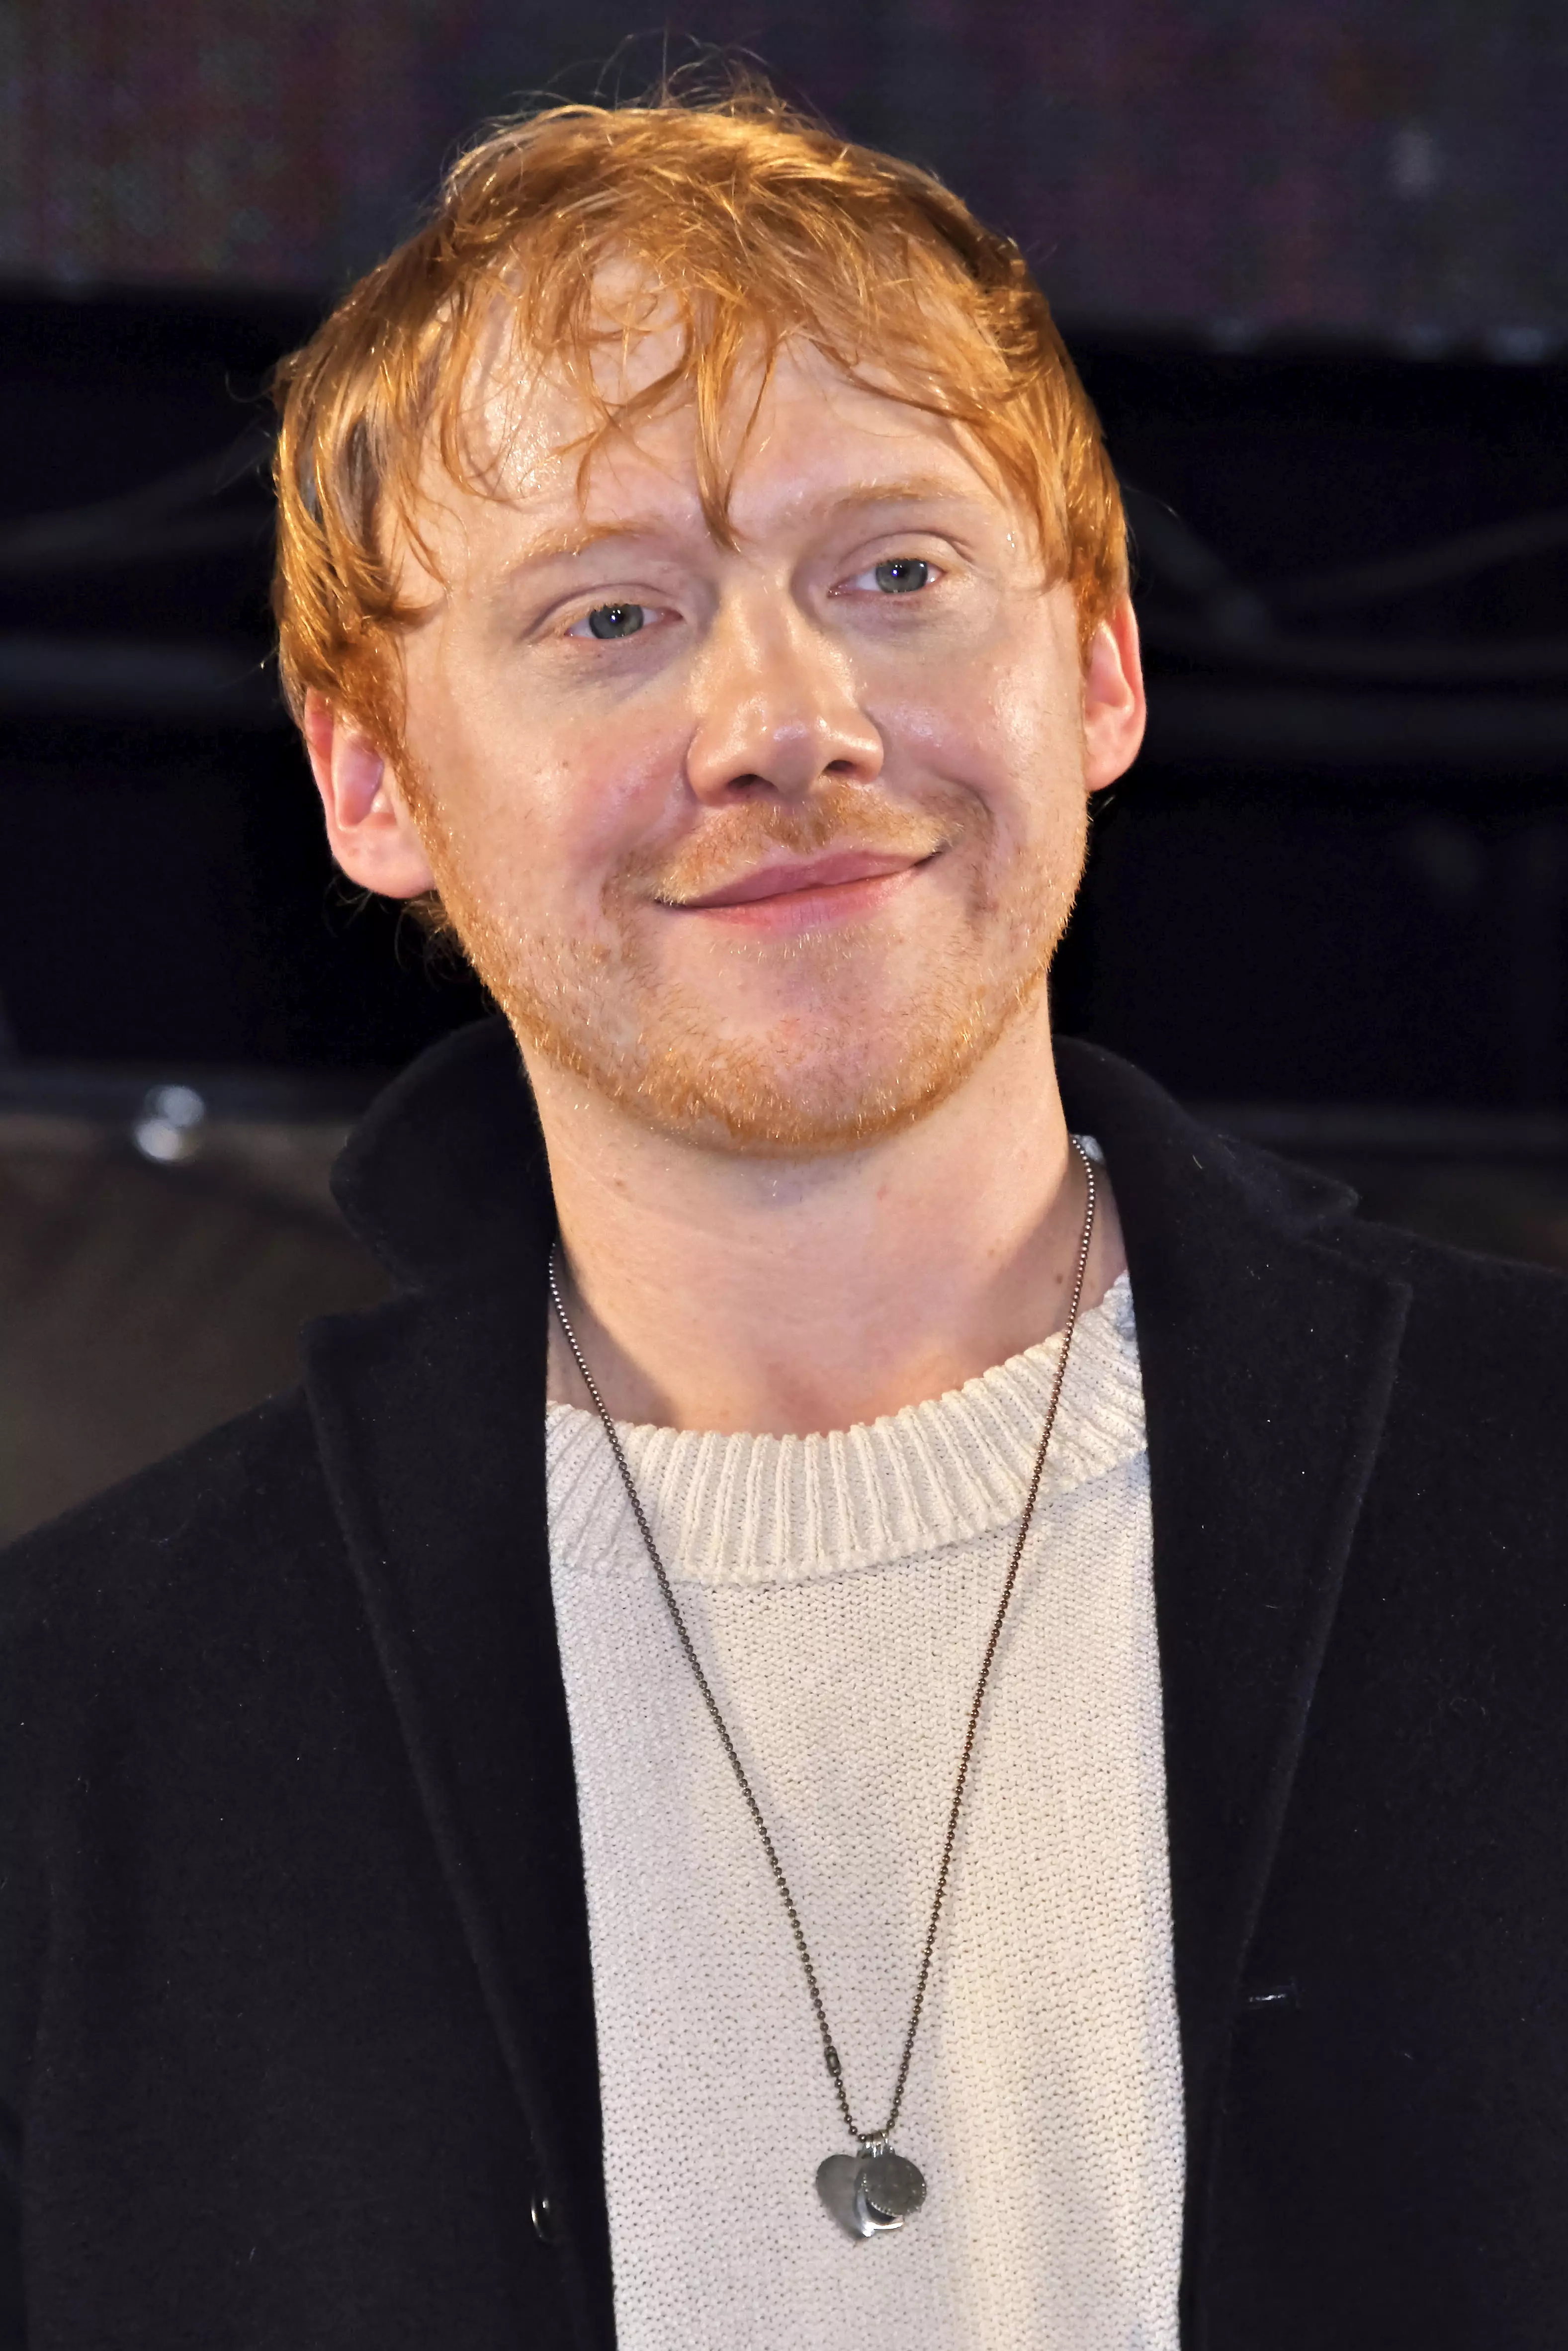 Rupert Grint at the 4th Tokyo Comic Con 2019.